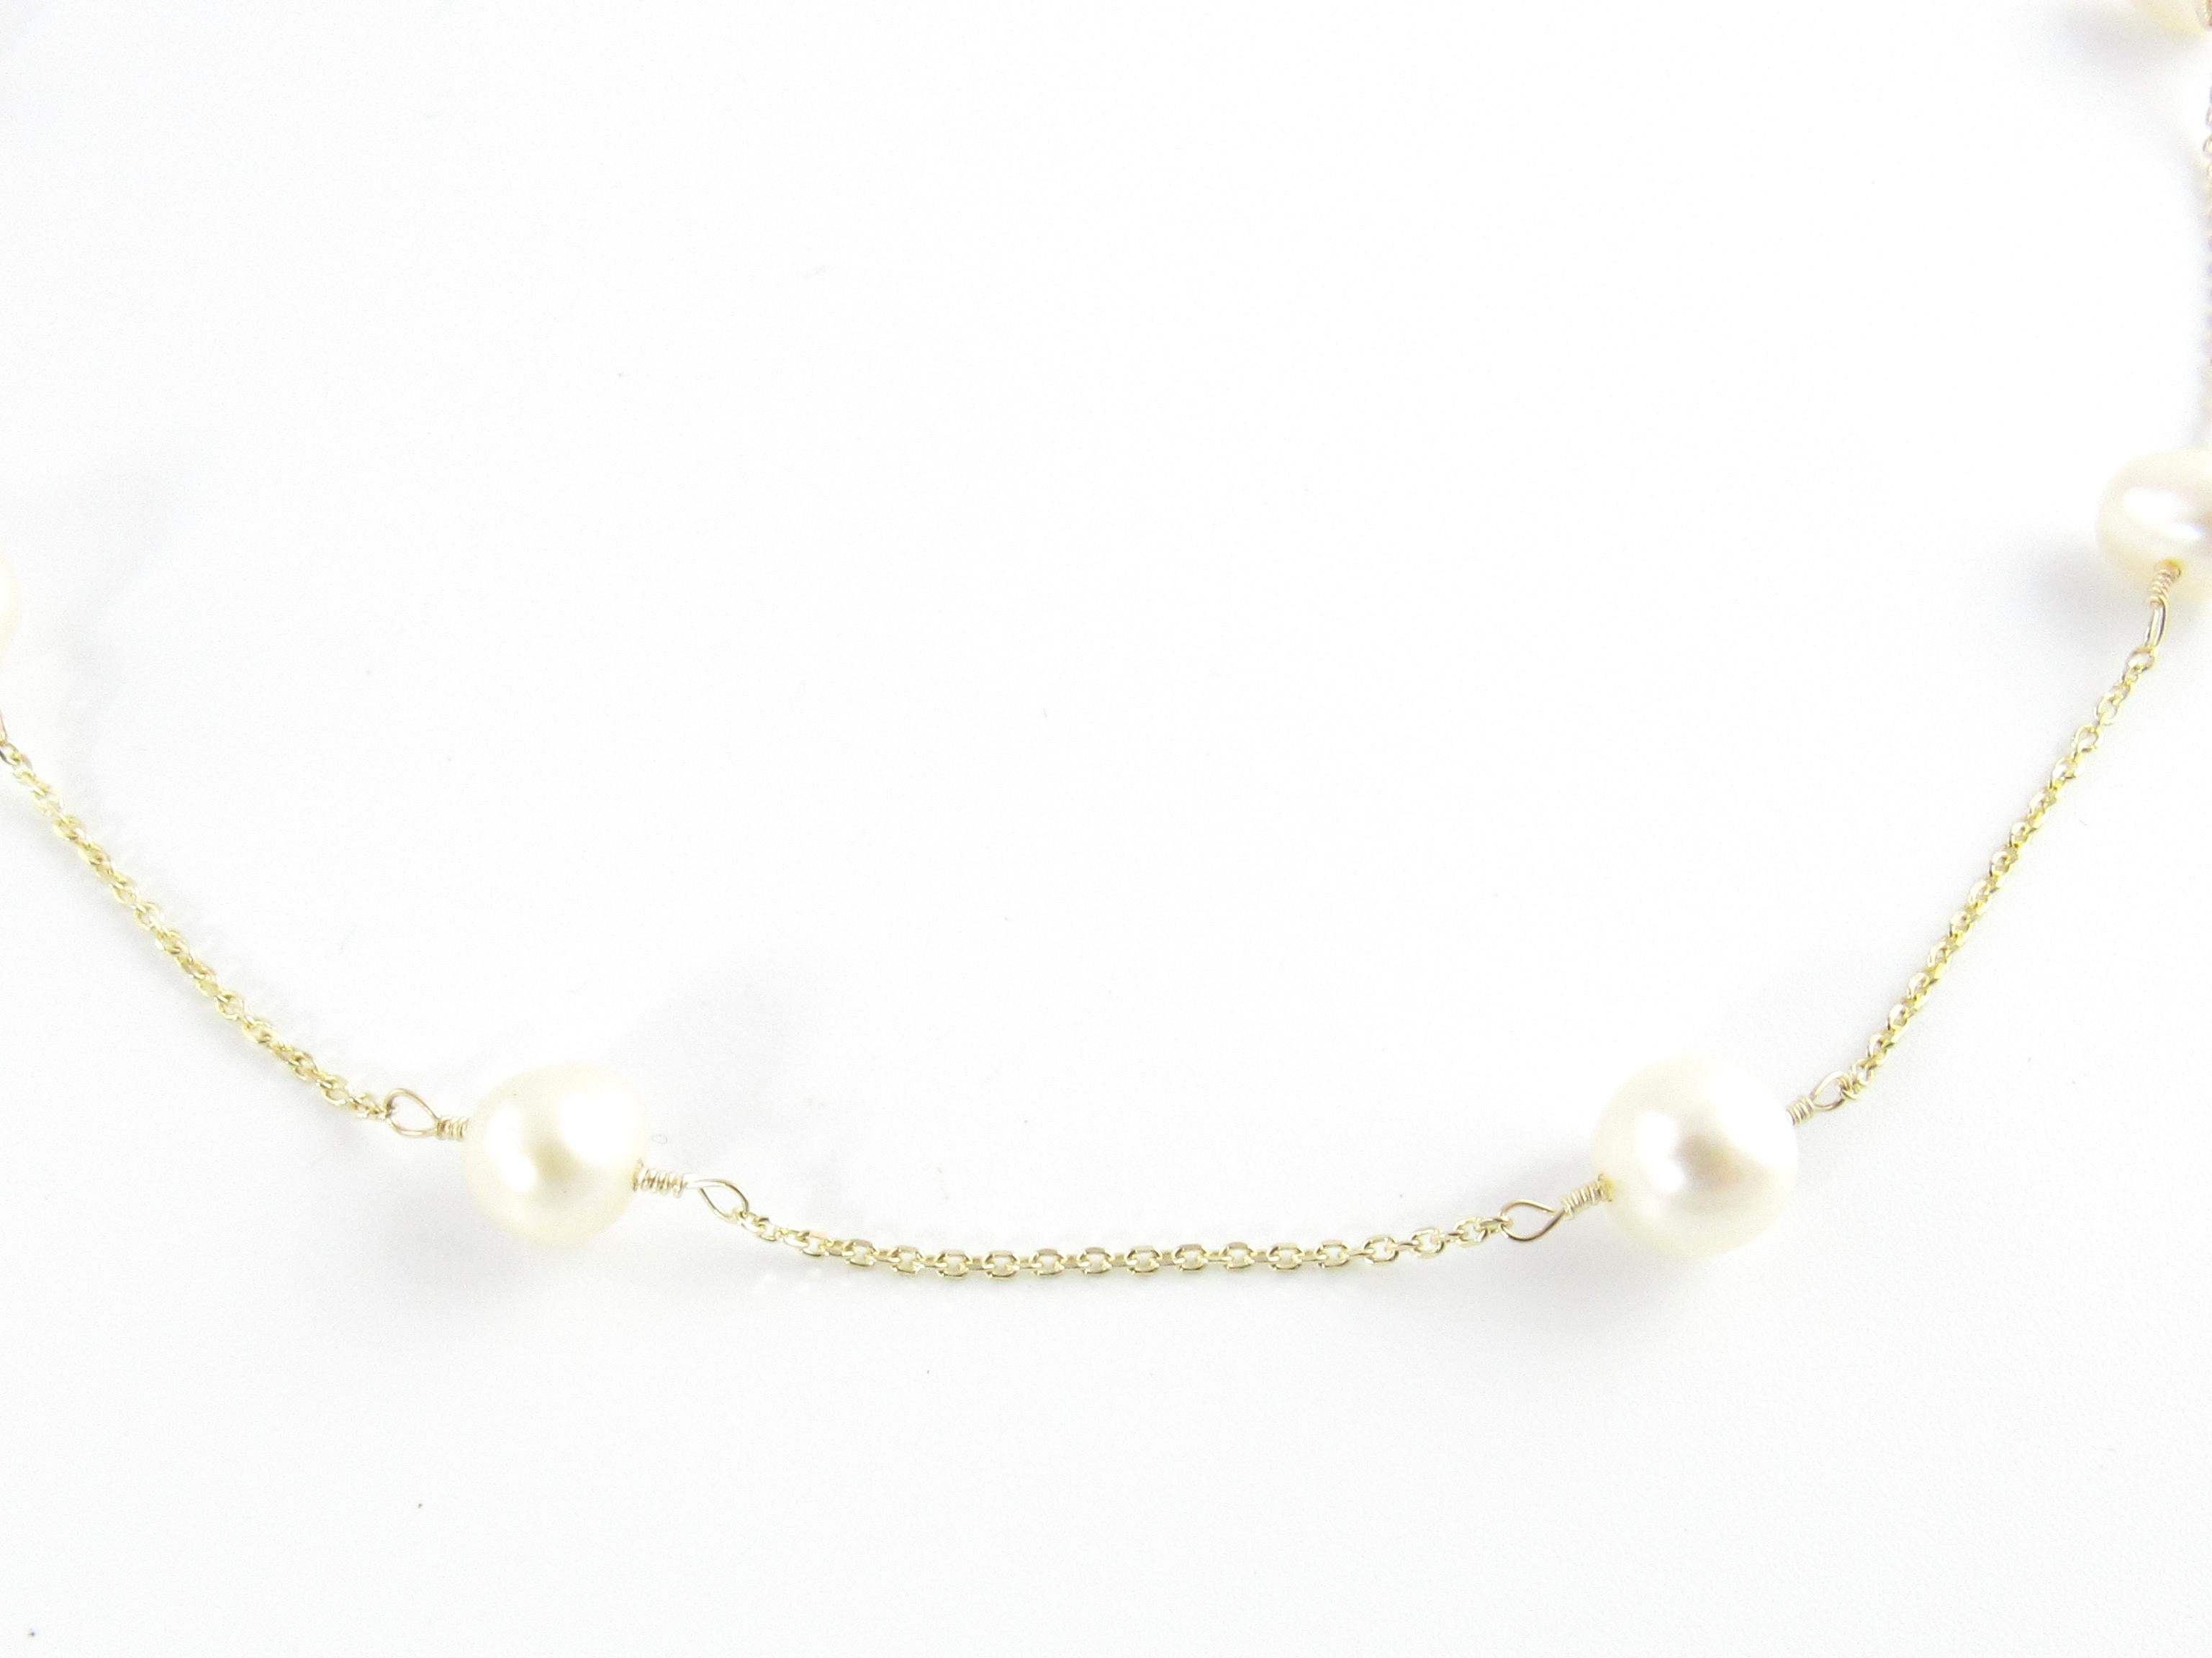 Vintage 14 Karat Yellow Gold and Pearl Necklace

This stunning necklace features ten lovely pearls (7 mm each) set on a classic 14K yellow gold chain.

Size: 16.25 inches

Weight: 3.8 dwt. / 6.0 gr.

Stamped: 14K

Very good condition, professionally